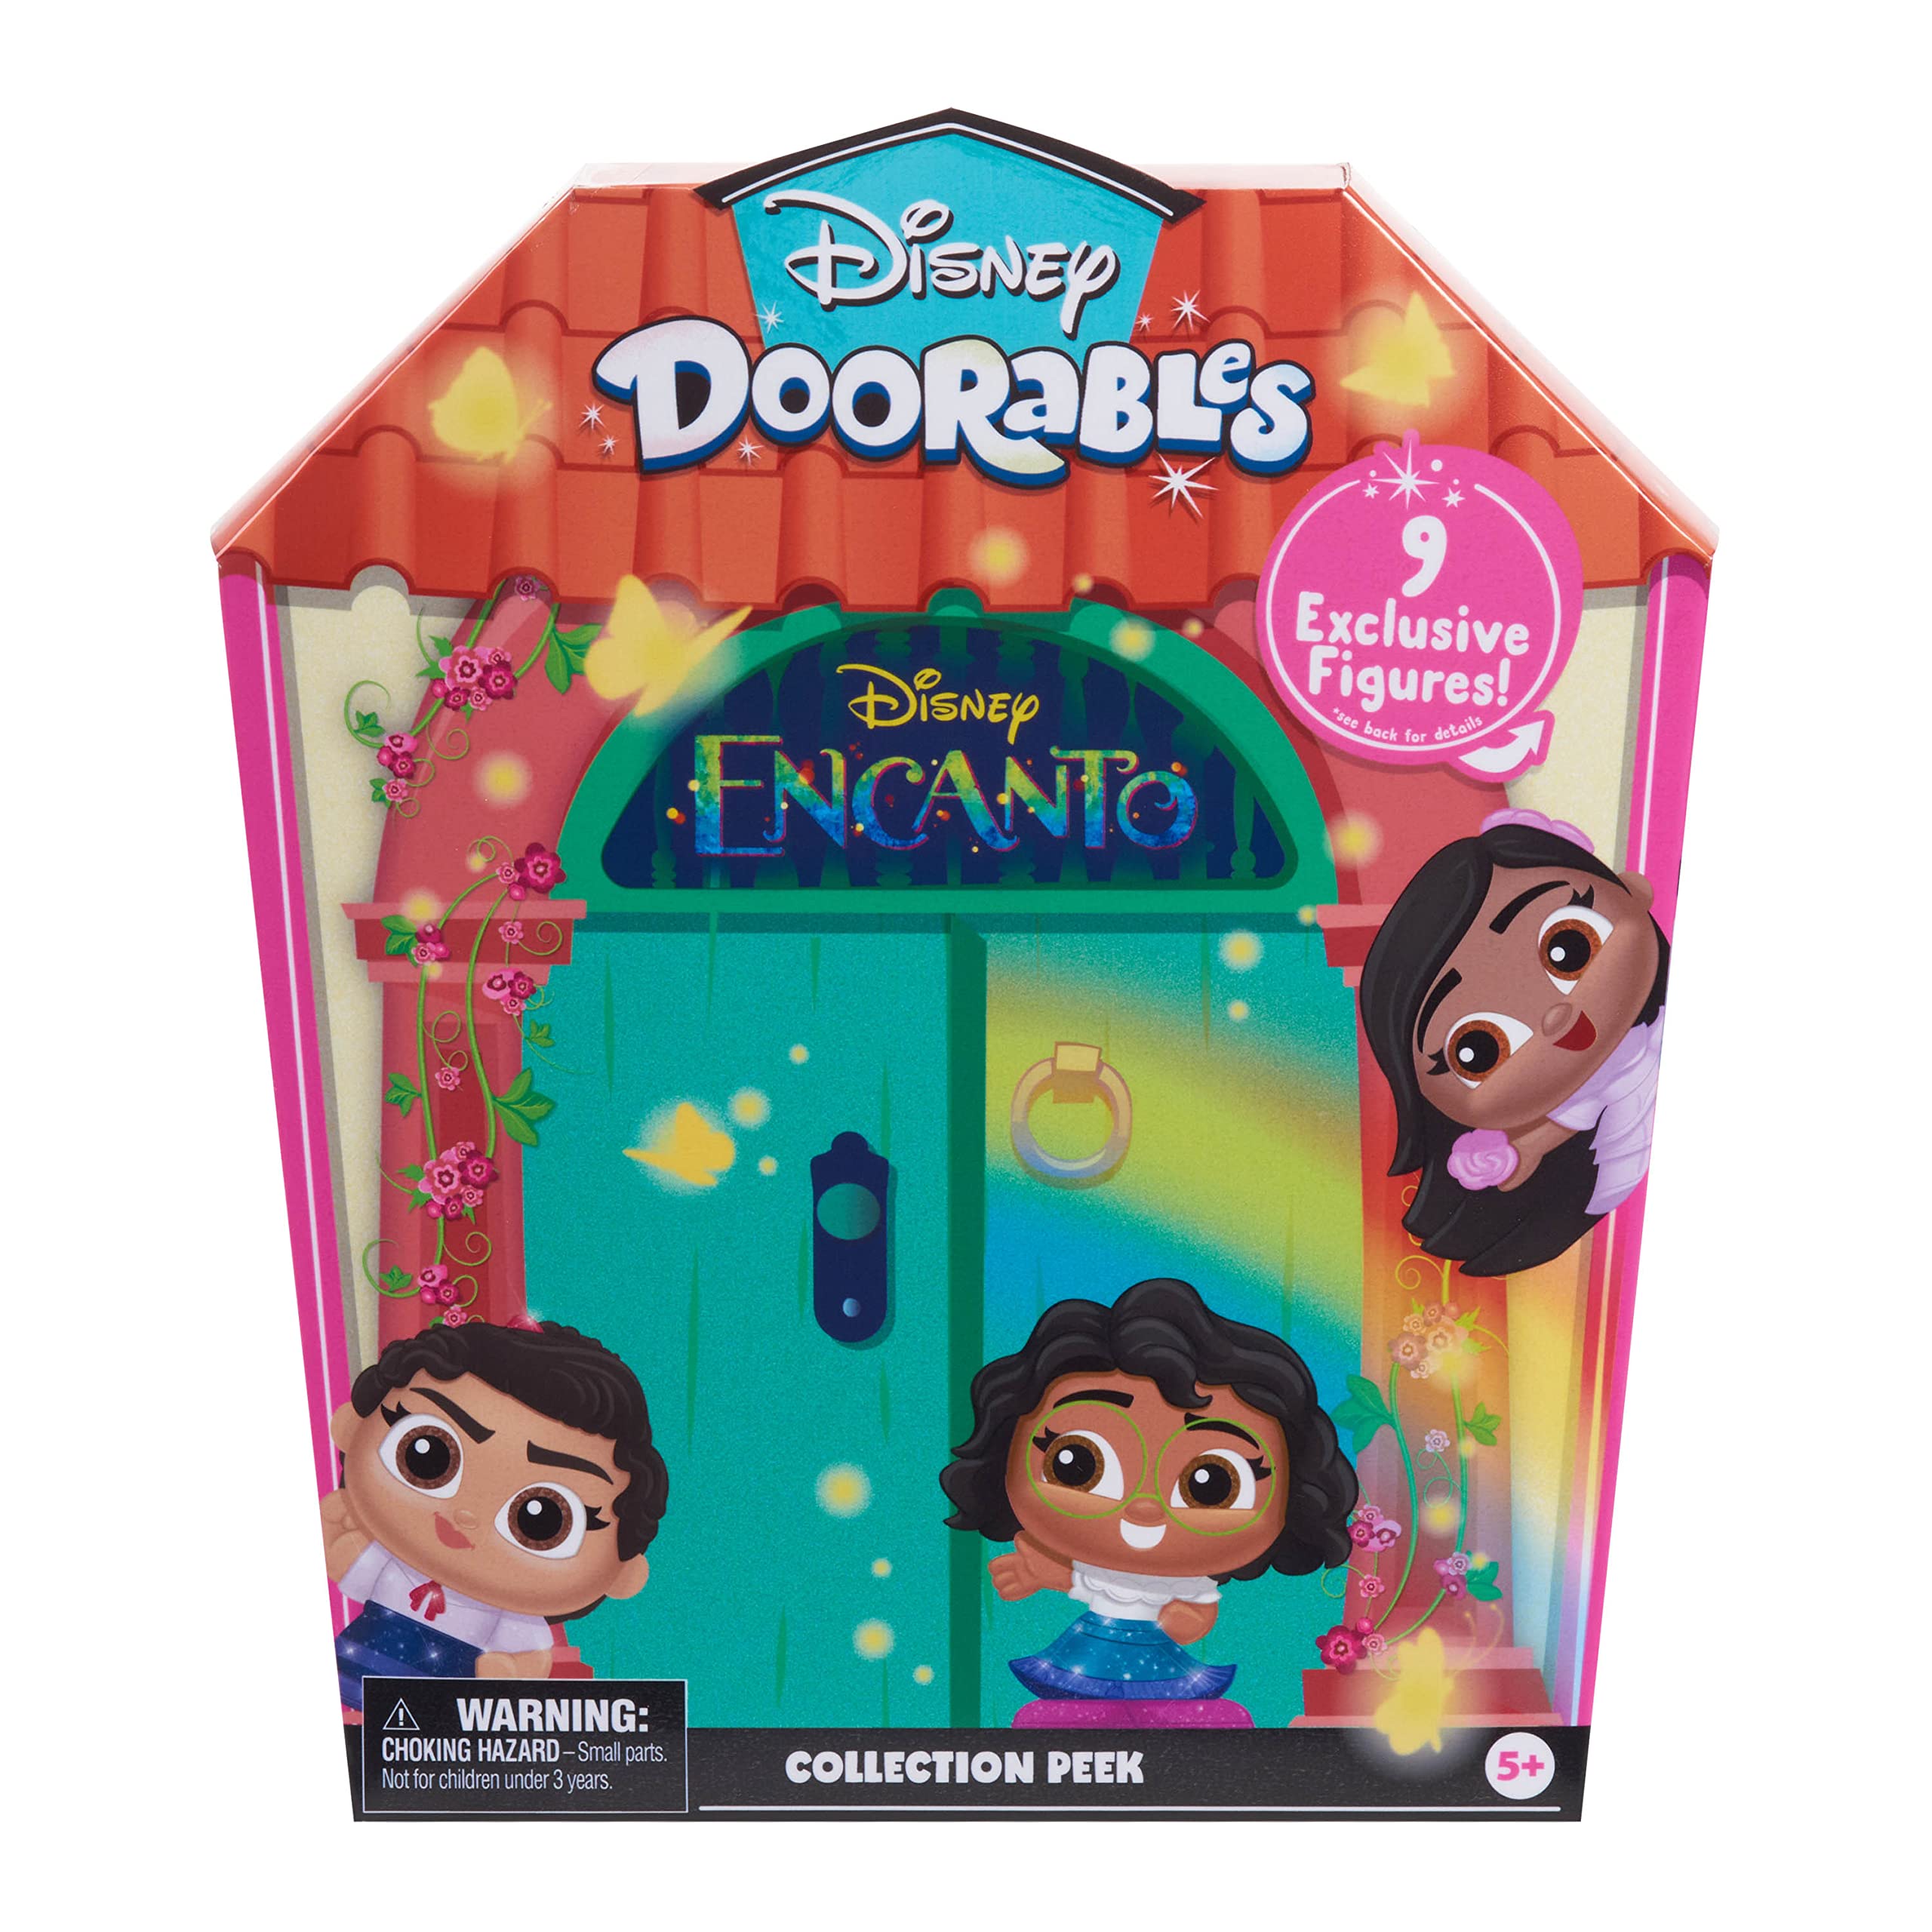 Disney Doorables Encanto Collection Peek, Collectible Figures, Officially Licensed Kids Toys for Ages 5 Up, and Presents